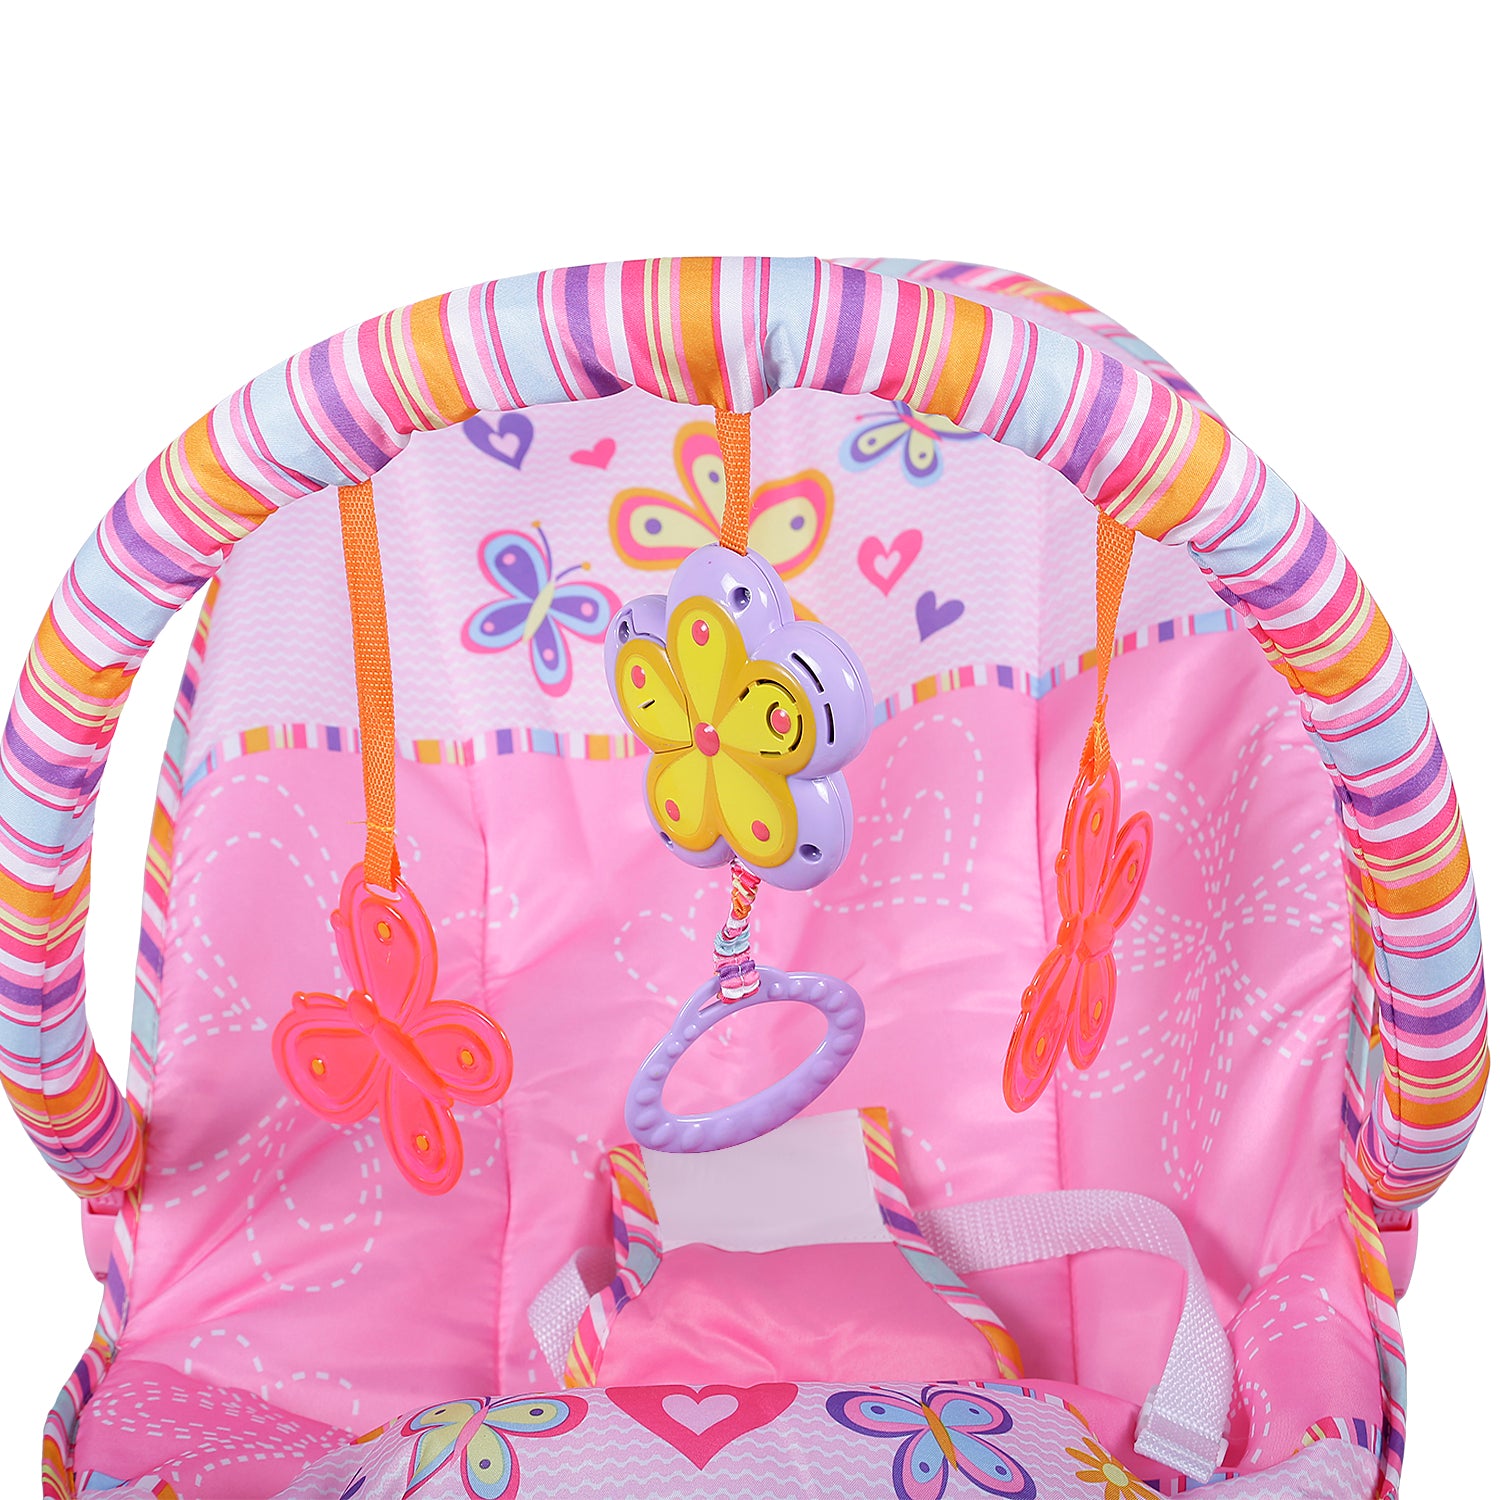 Jungle Friends Soothing Vibrations Bouncer Rocker With Musical Hanging Toys - Pink - Baby Moo